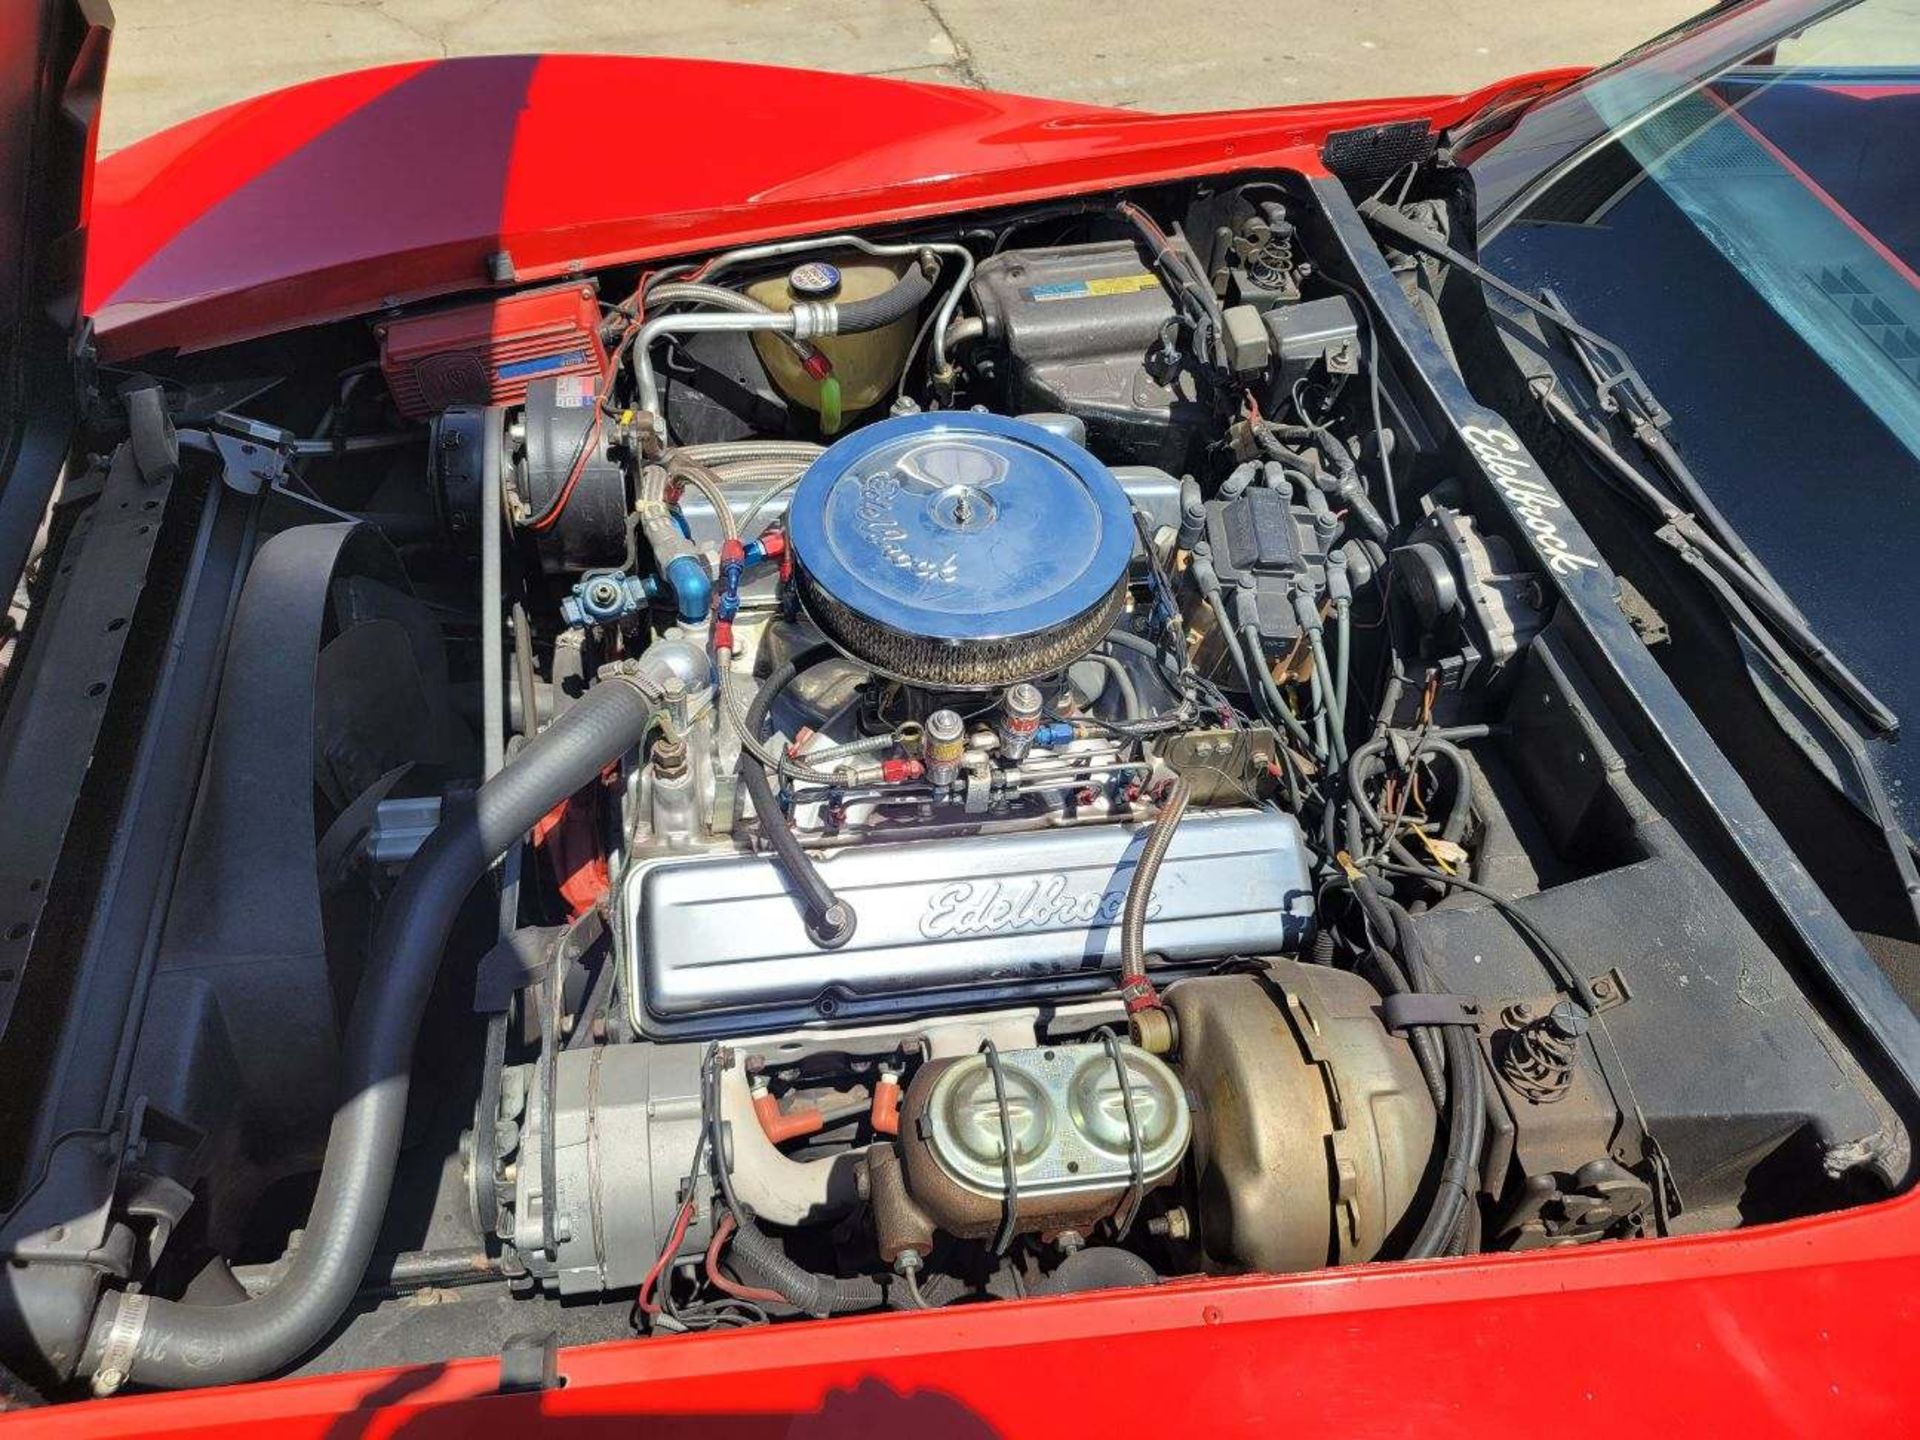 1980 CHEVROLET CORVETTE, WAS VIC EDELBROCK'S PERSONAL CAR BOUGHT FOR R&D, RED INTERIOR, TITLE ONLY. - Image 68 of 70